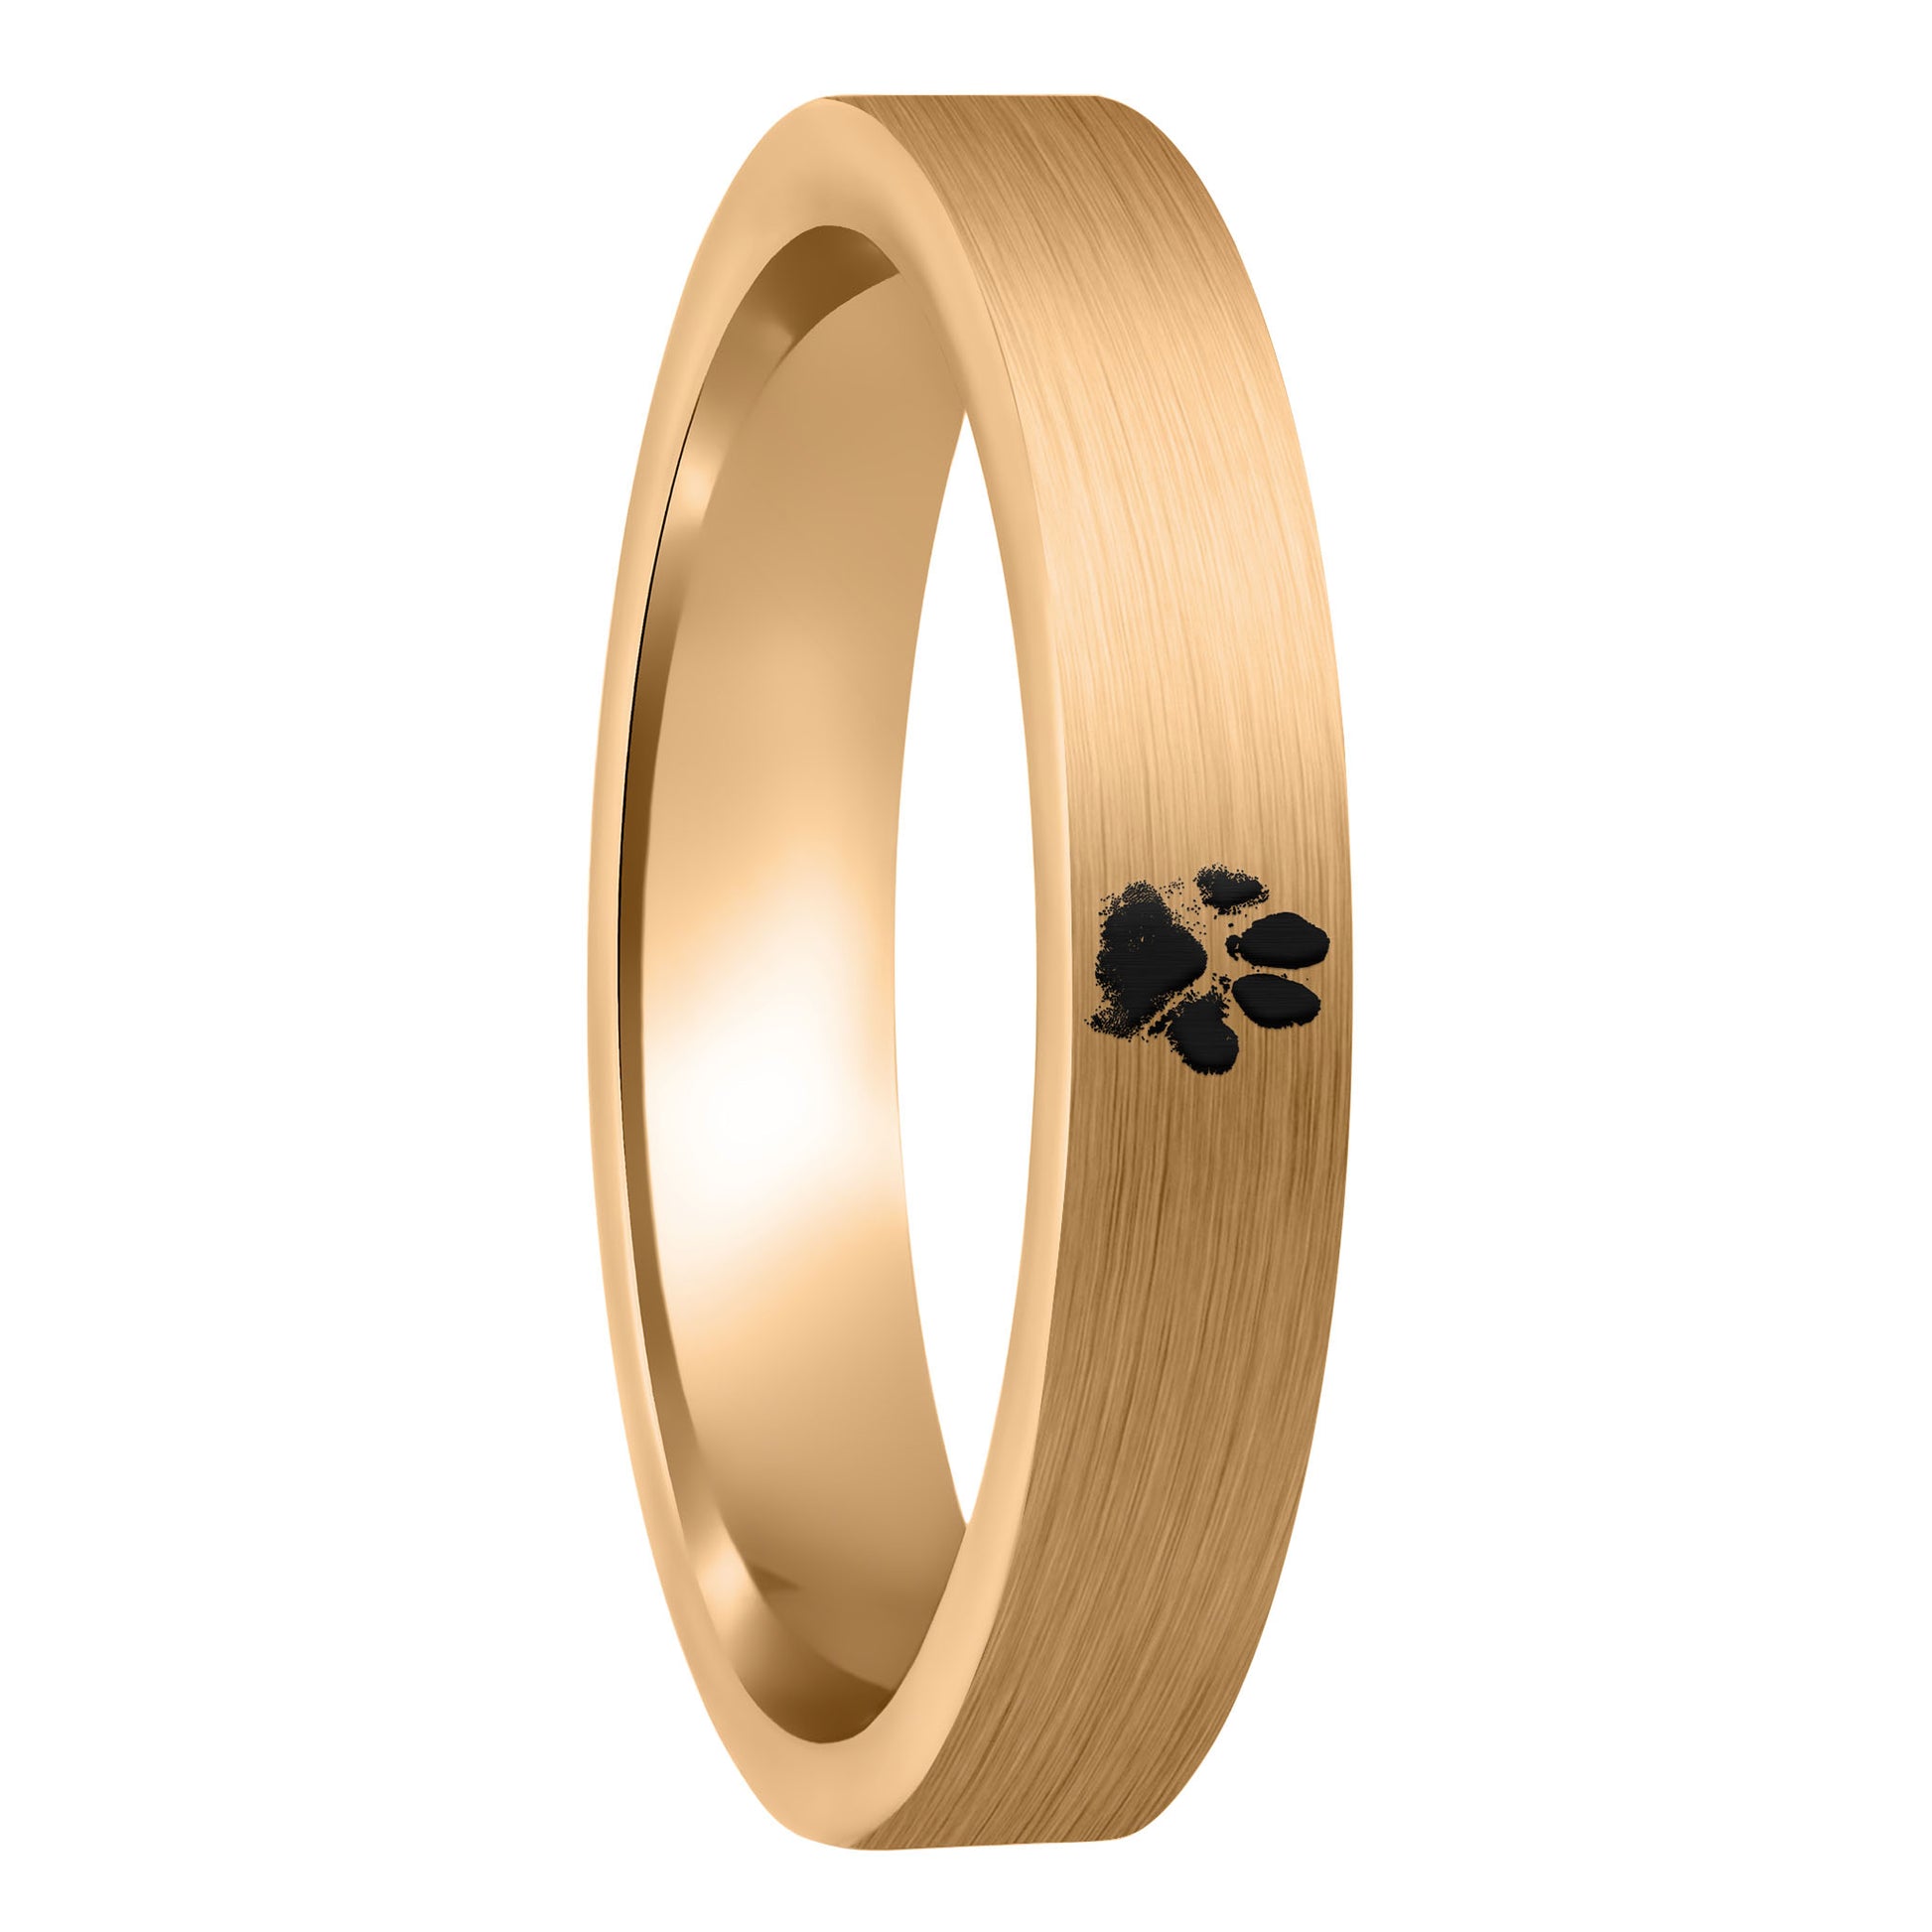 A custom paw print brushed rose gold tungsten women's wedding band displayed on a plain white background.